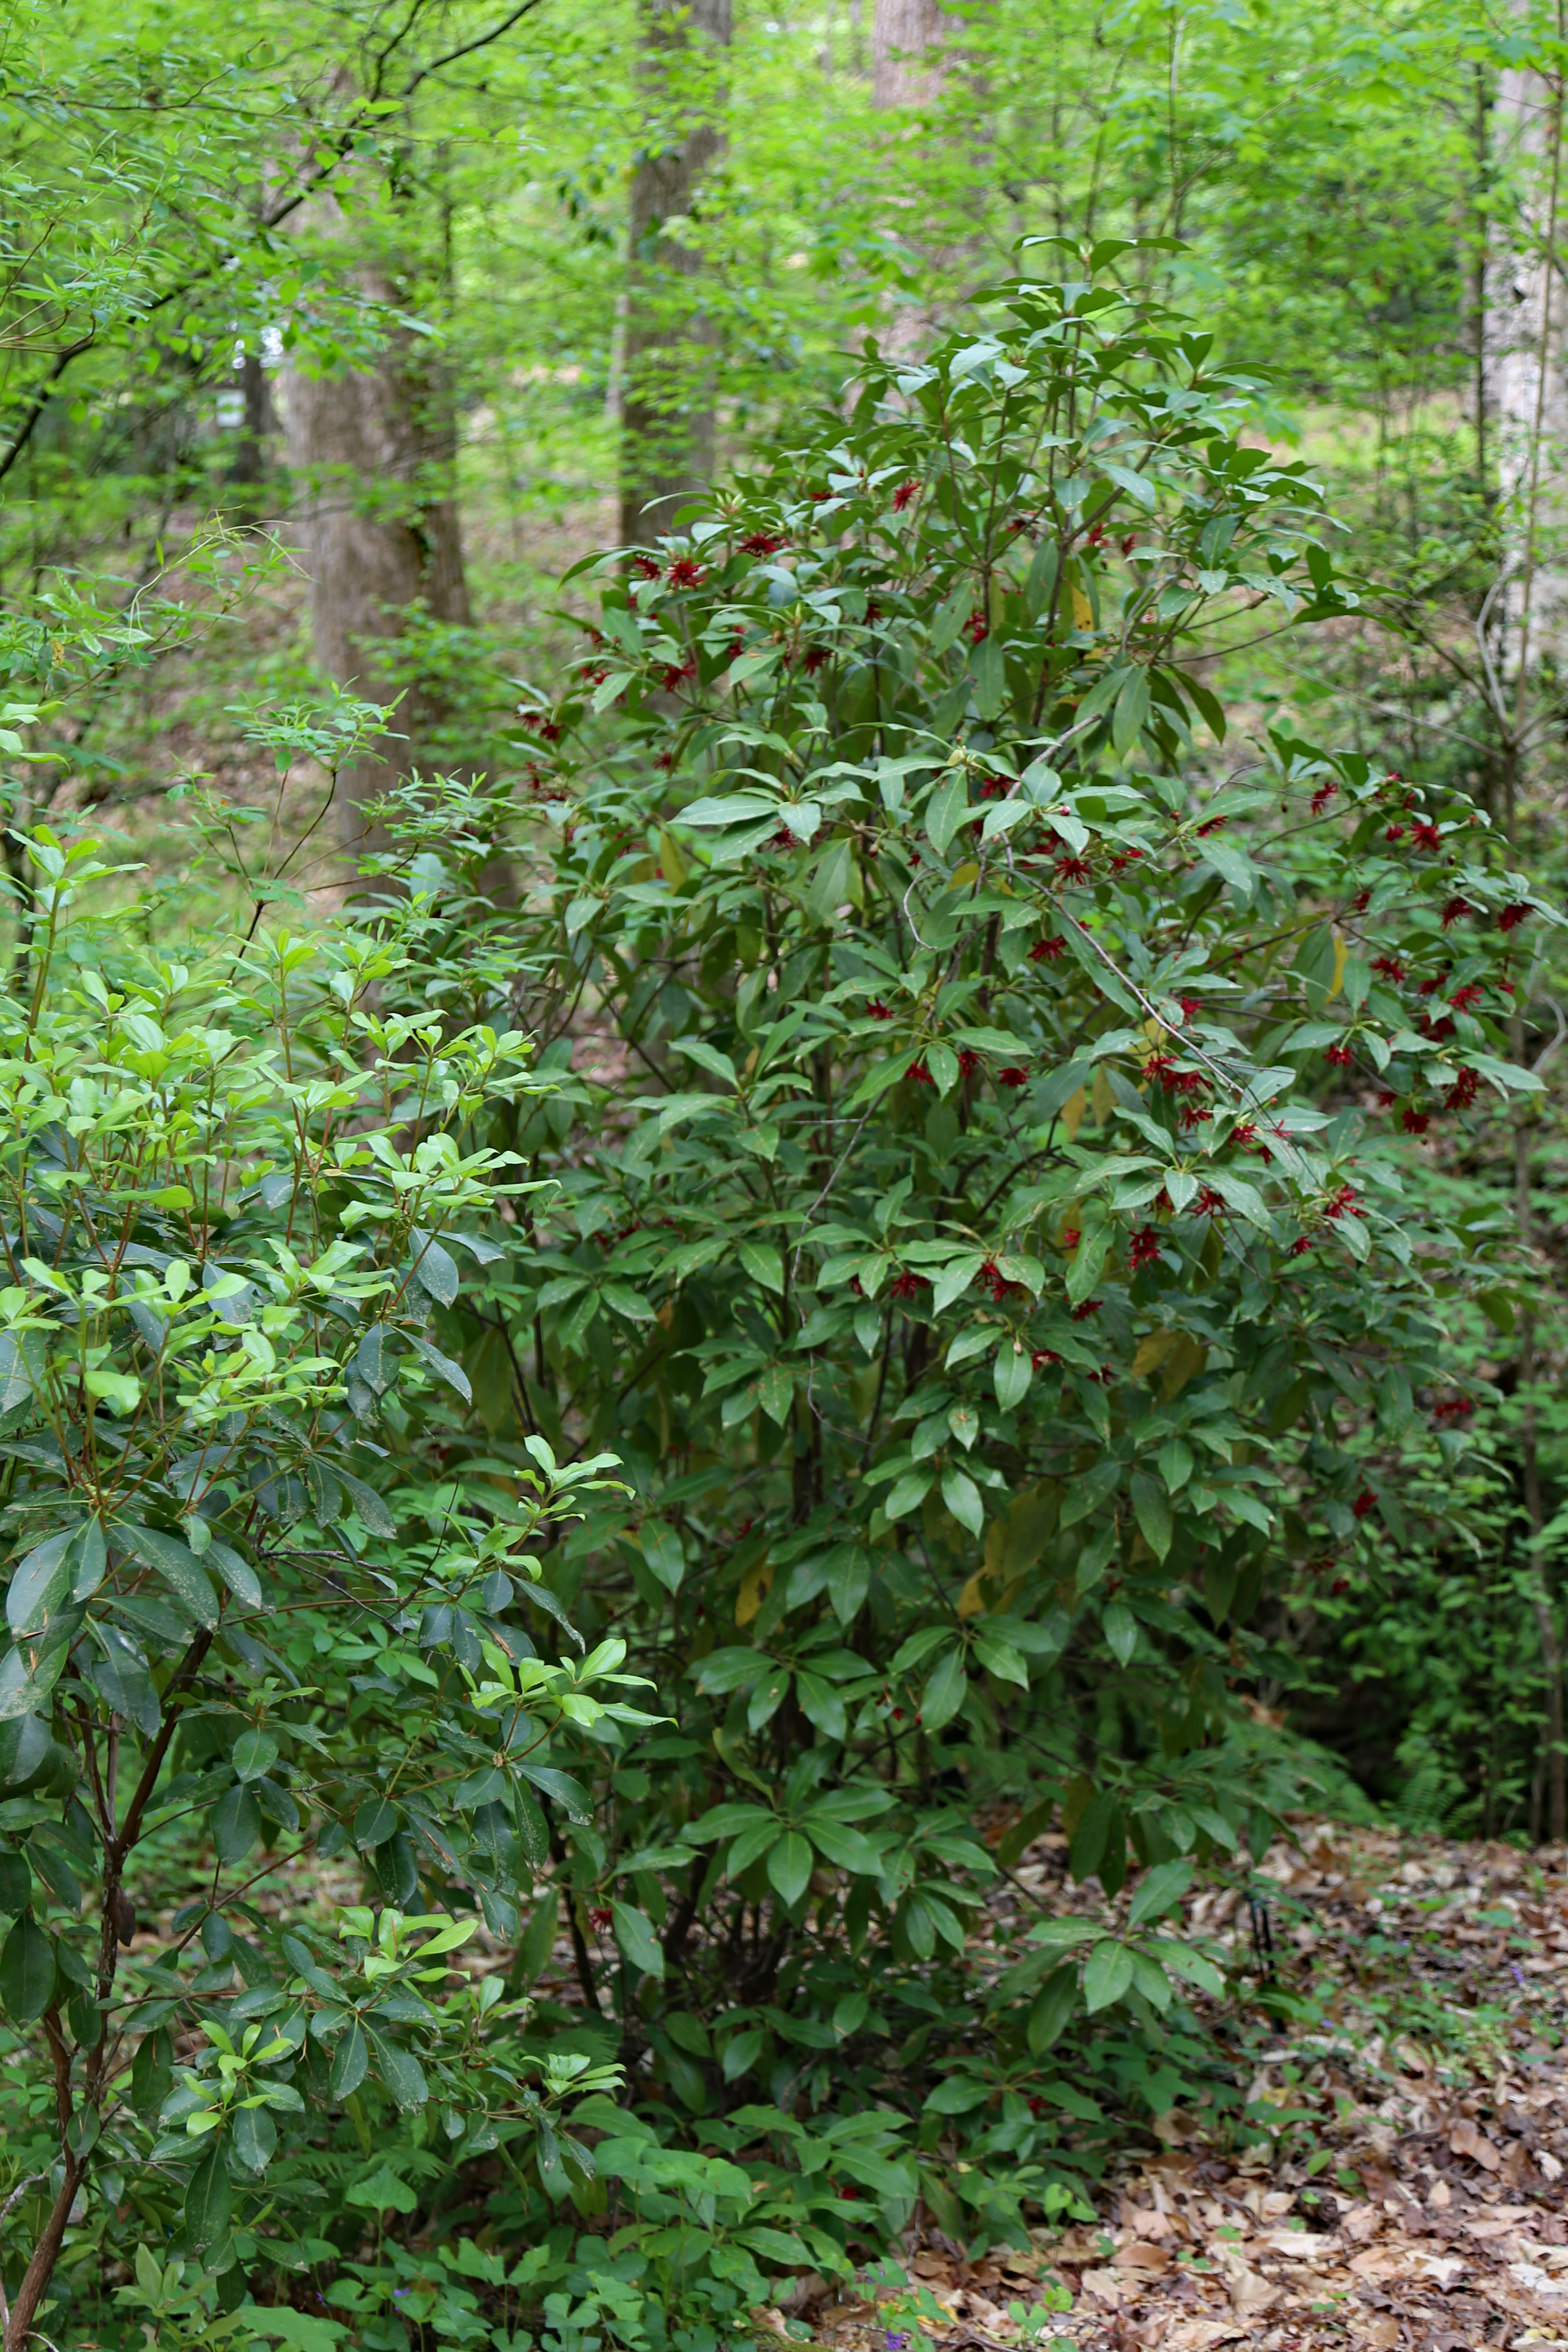 The Scientific Name is Illicium floridanum. You will likely hear them called Florida Anisetree, Anise Tree, Florida Star-anise. This picture shows the A shrub/tree to 25 feet tall, usually multi-stemmed, evergreen with simple, elliptical,  leathery, lustrous green leaves. of Illicium floridanum